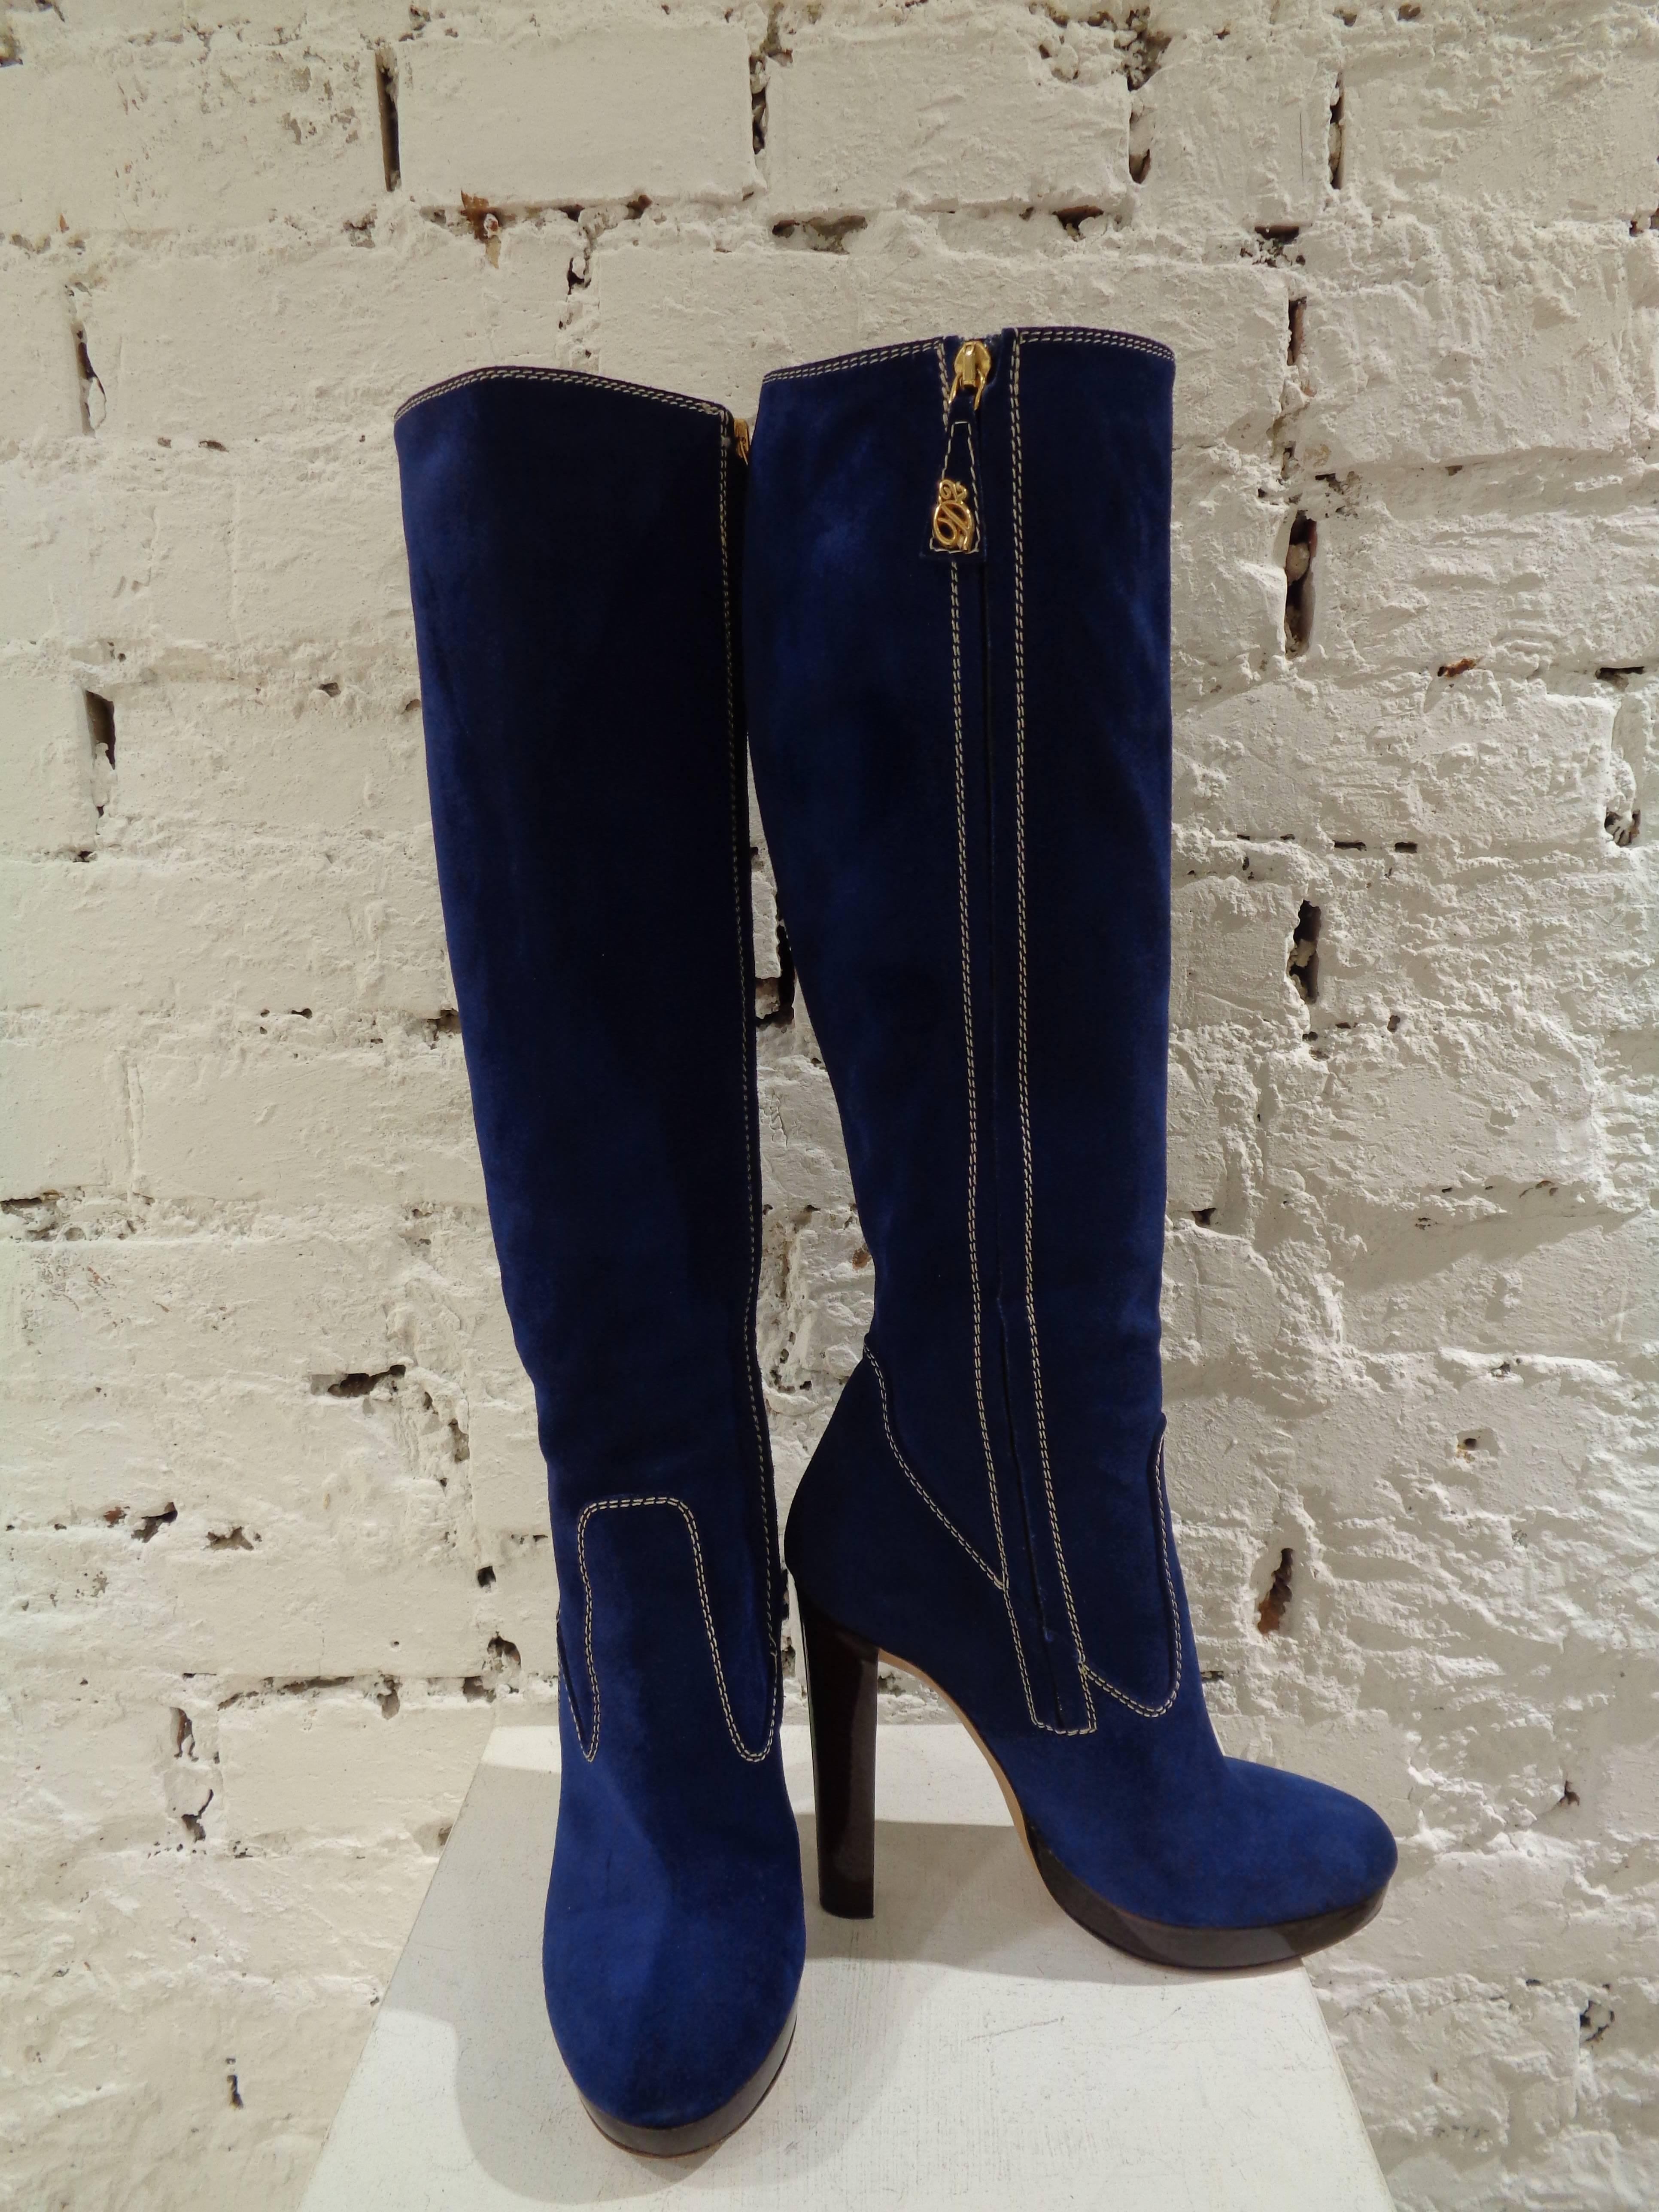 Dsquared2 Blu velvet boots

totally made in italy

size 37

used few times